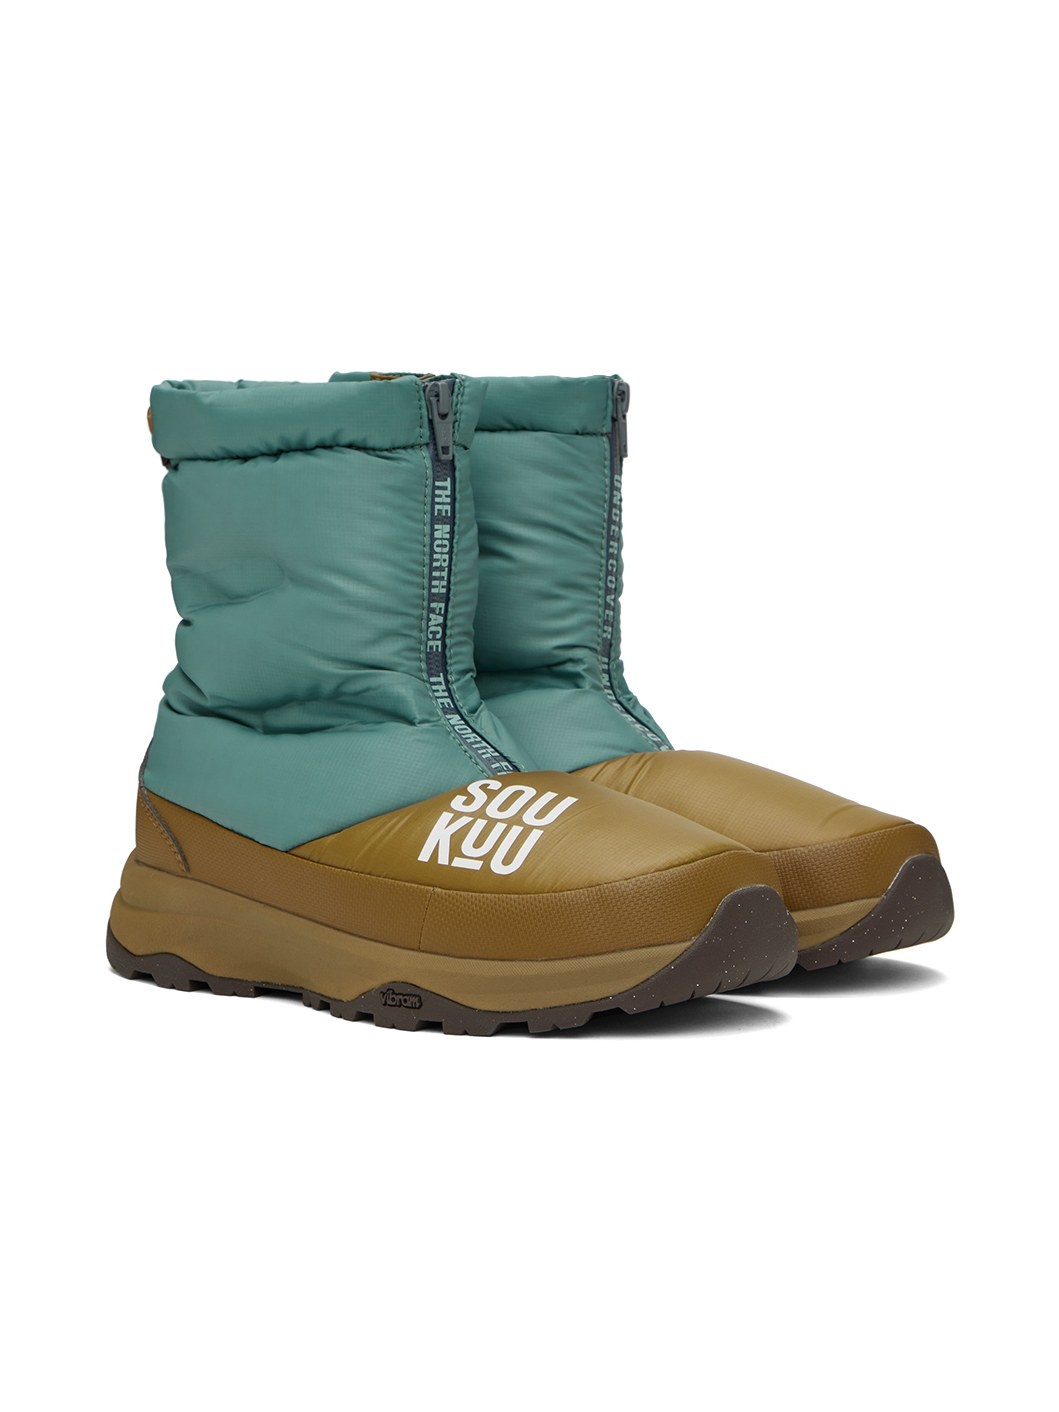 Brown The North Face Edition Soukuu Nuptse Boots - 4